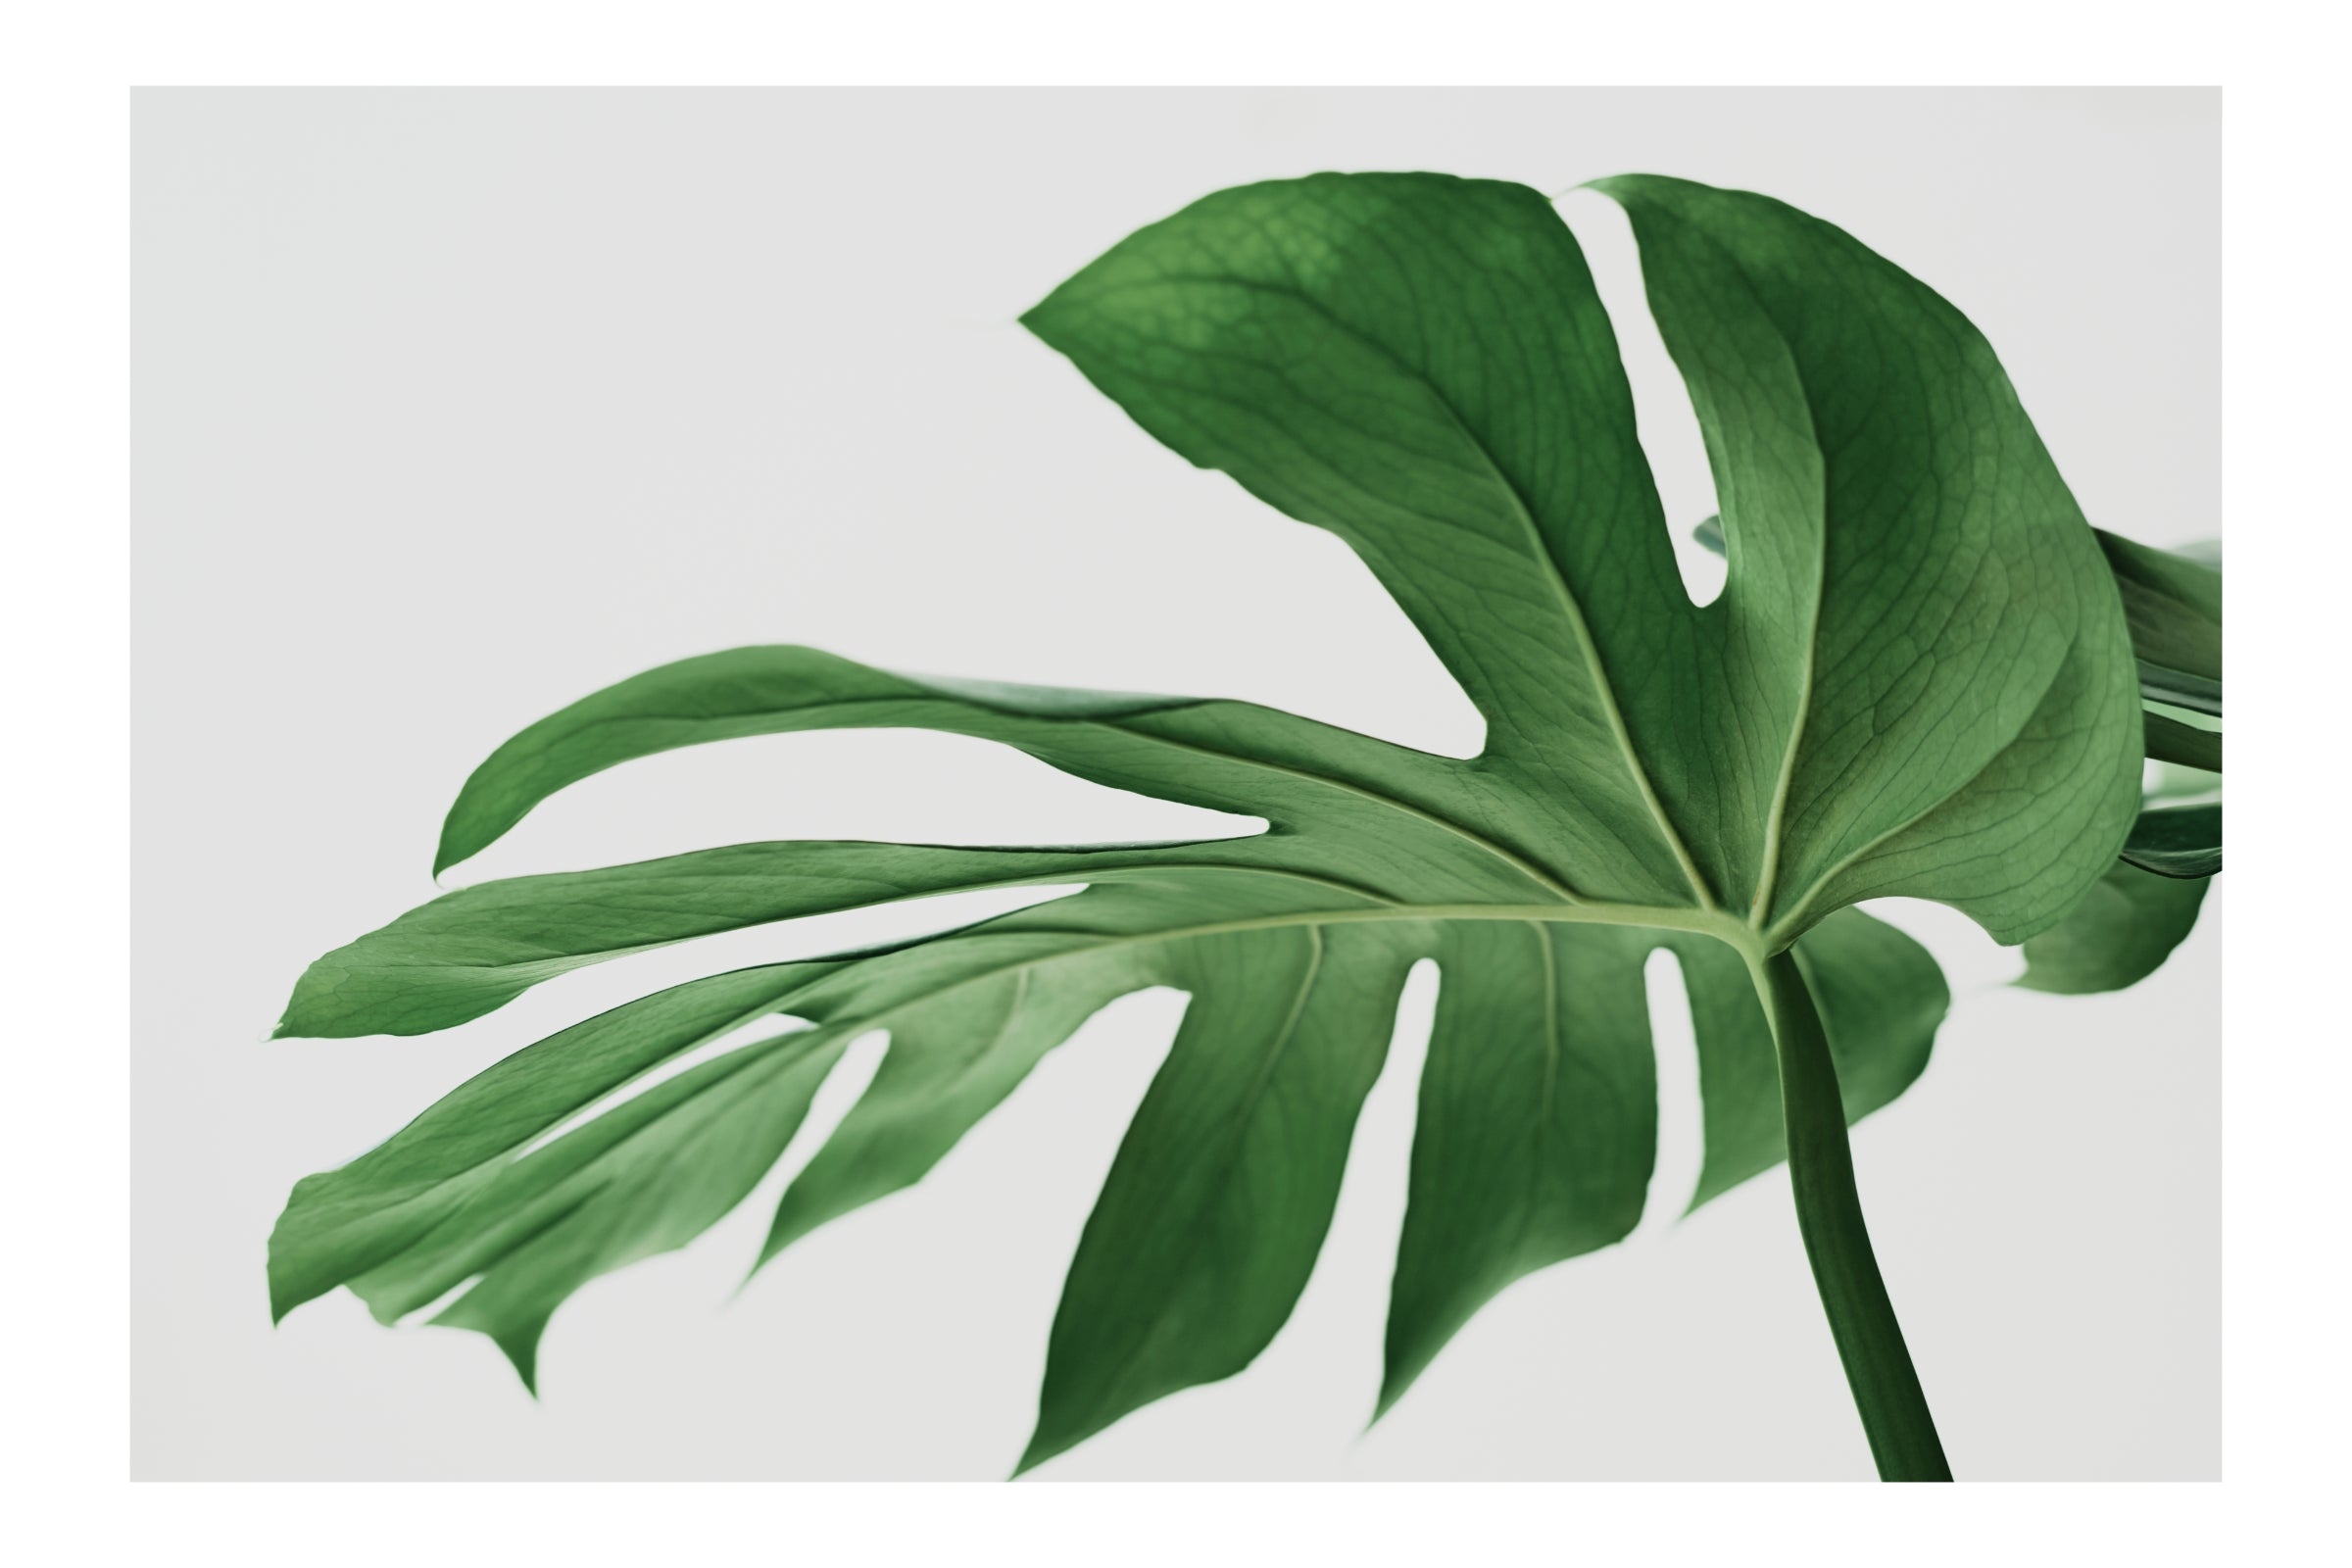 The Marvelous Monstera: A Popular Houseplant - Leaf Culture